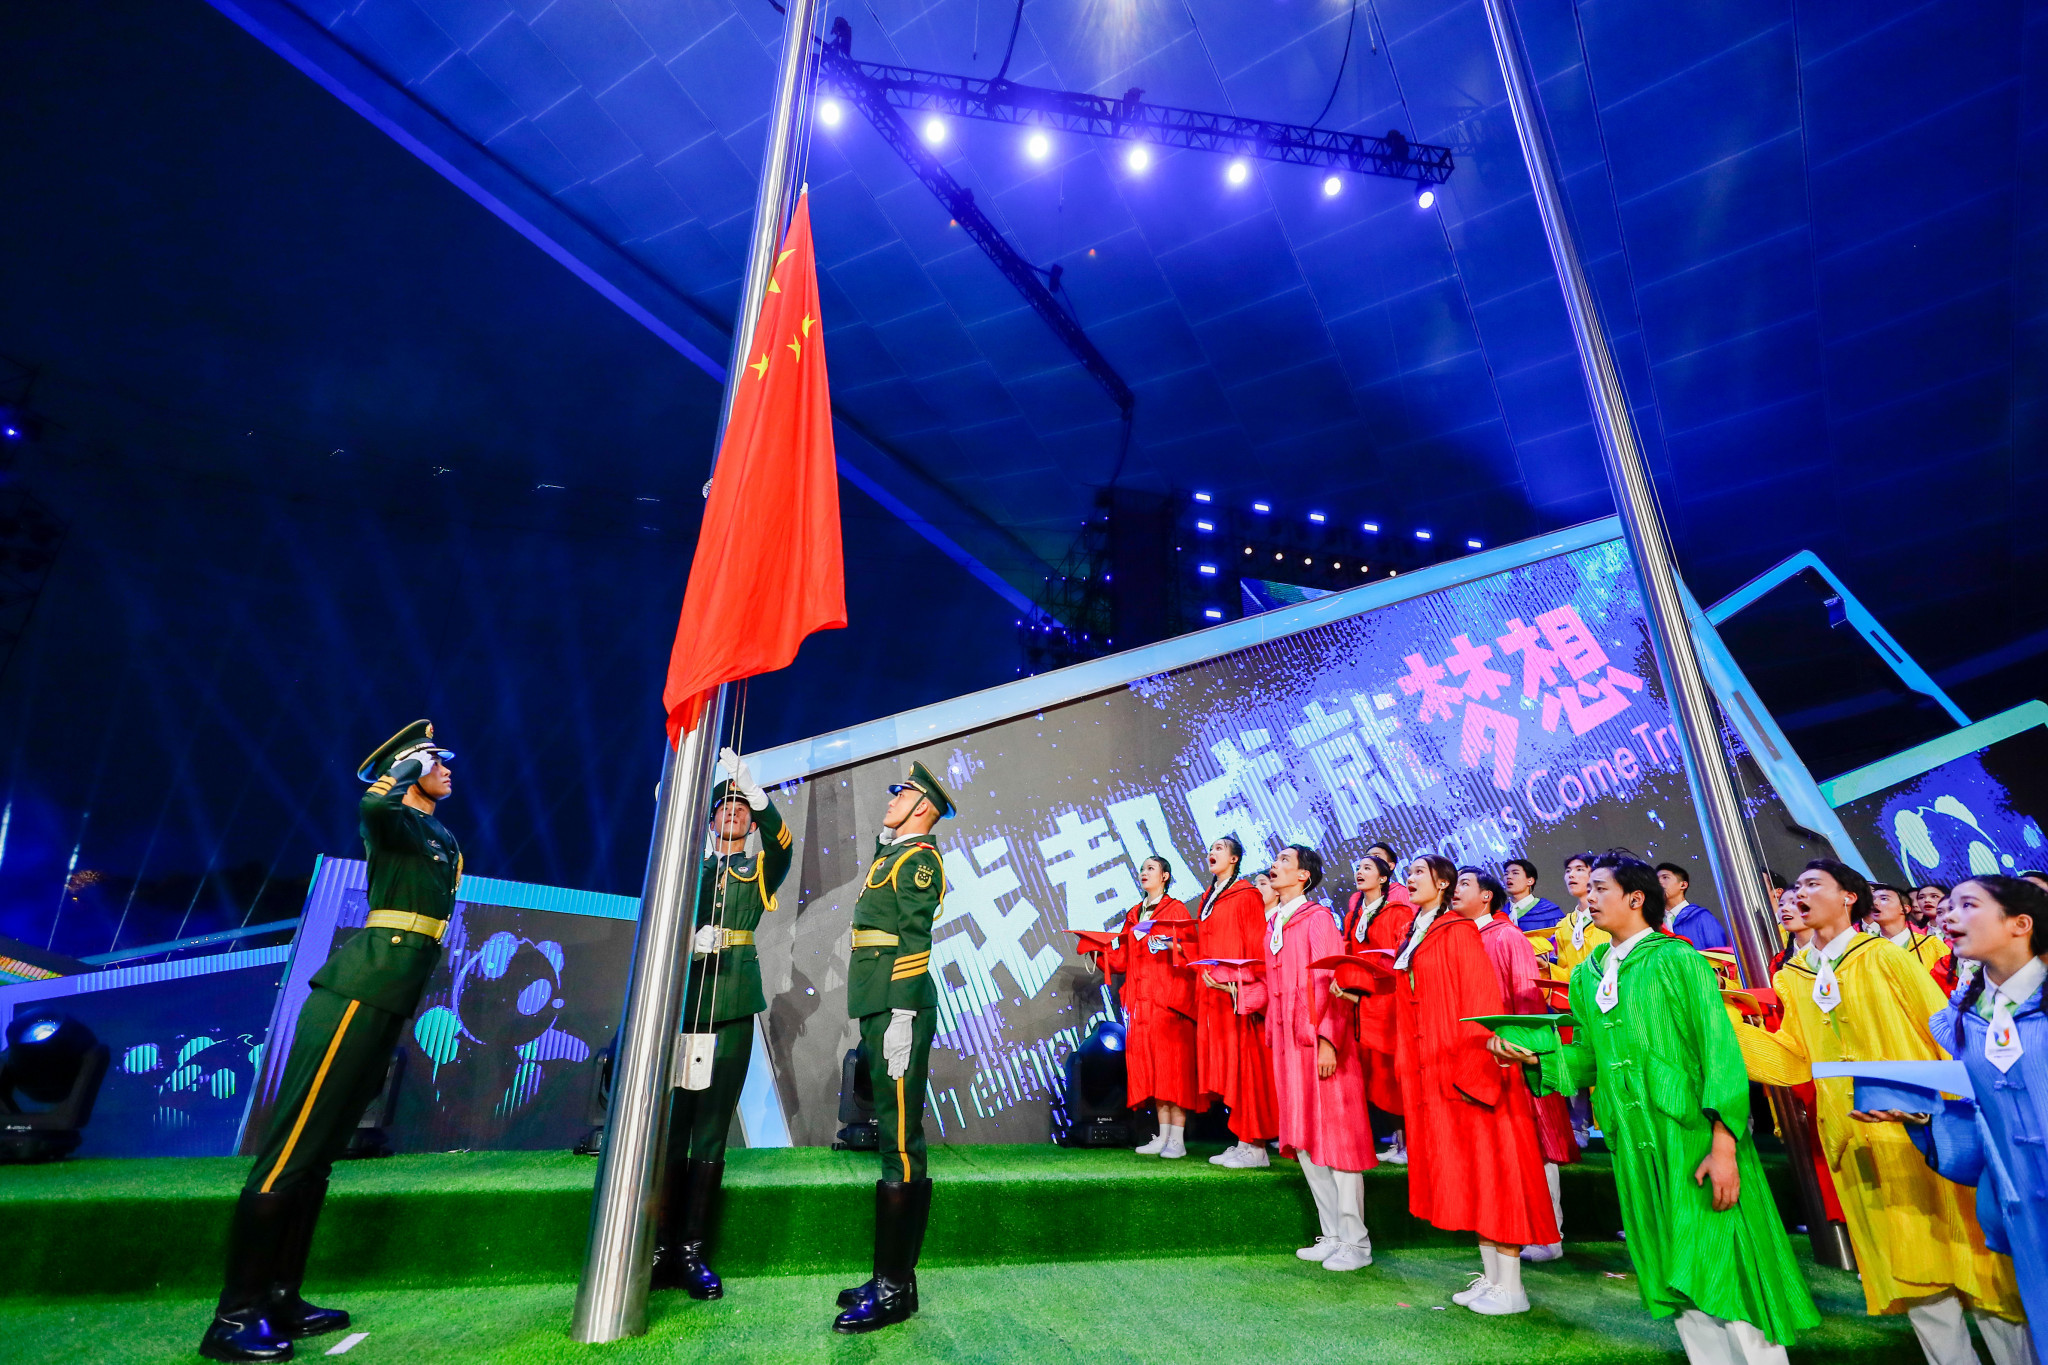 The Chinese flag is raised during the formal part of proceedings at the Chengdu 2021 Closing Ceremony ©FISU